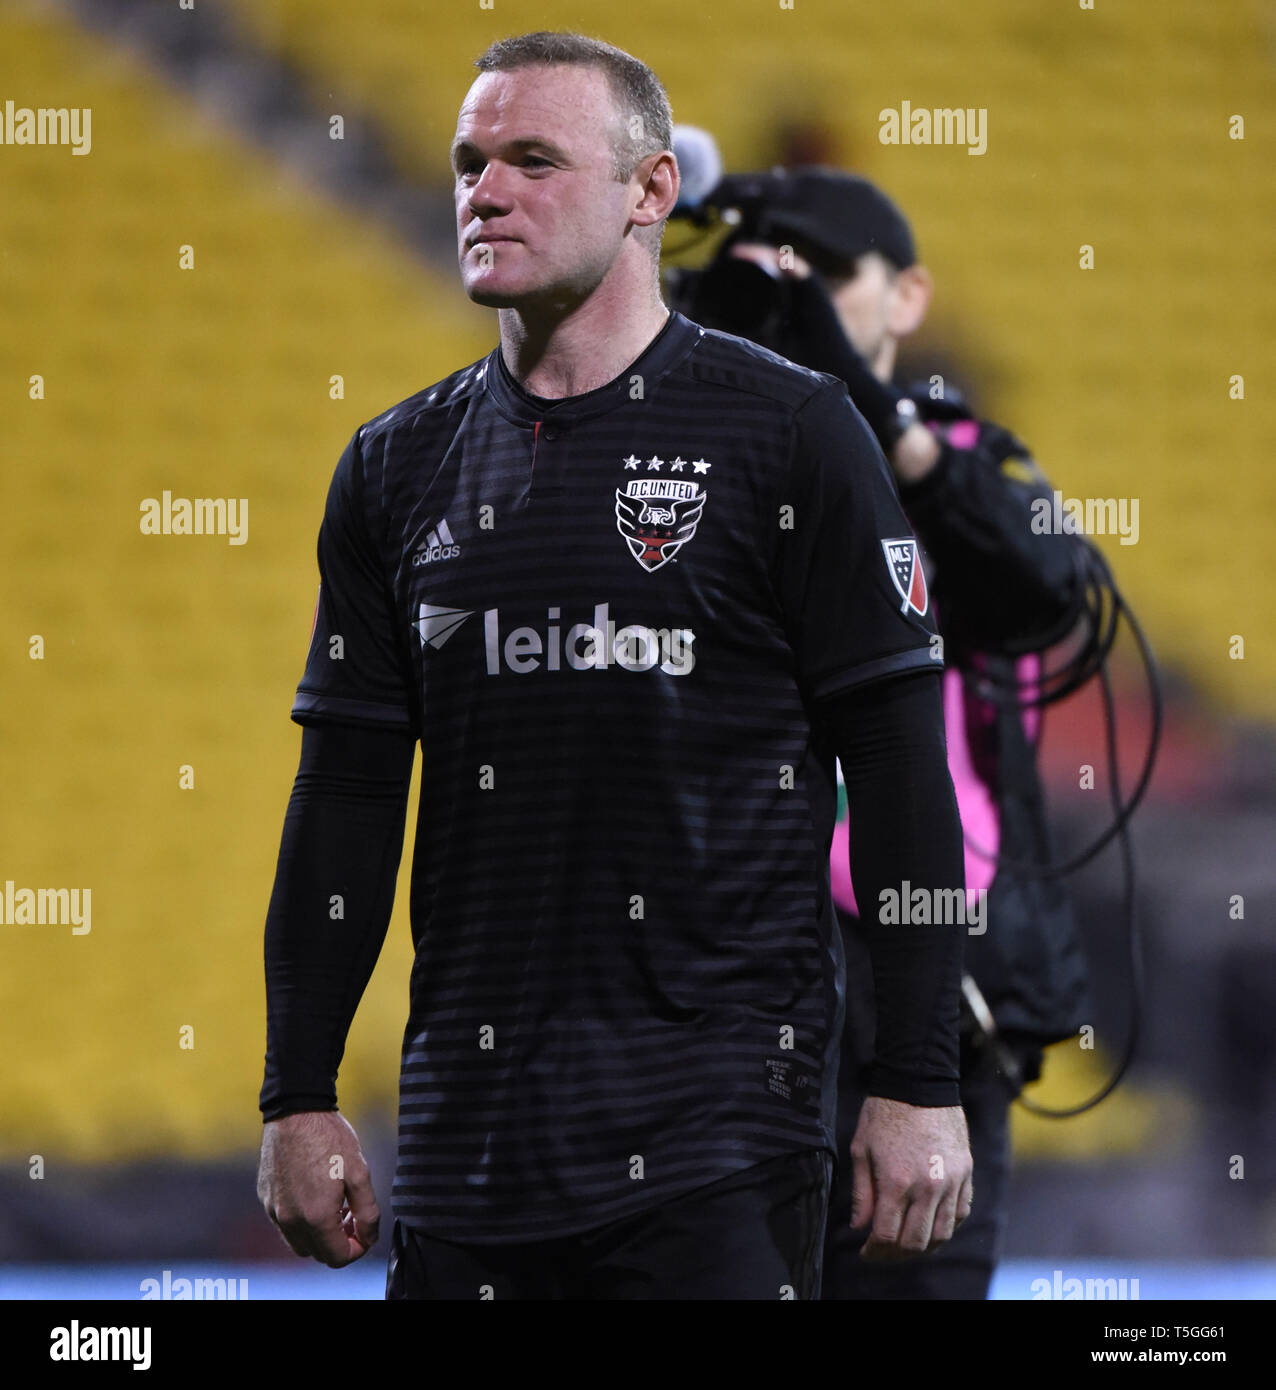 Columbus, OH, USA. 24th Apr, 2019. April 24, 2019: D.C. United forward Wayne Rooney (9) walks off the field after the MLS match between DC United and Columbus Crew SC at Mapfre Stadium in Columbus, Ohio. Austyn McFadden/ZUMA Credit: Austyn McFadden/ZUMA Wire/Alamy Live News Stock Photo